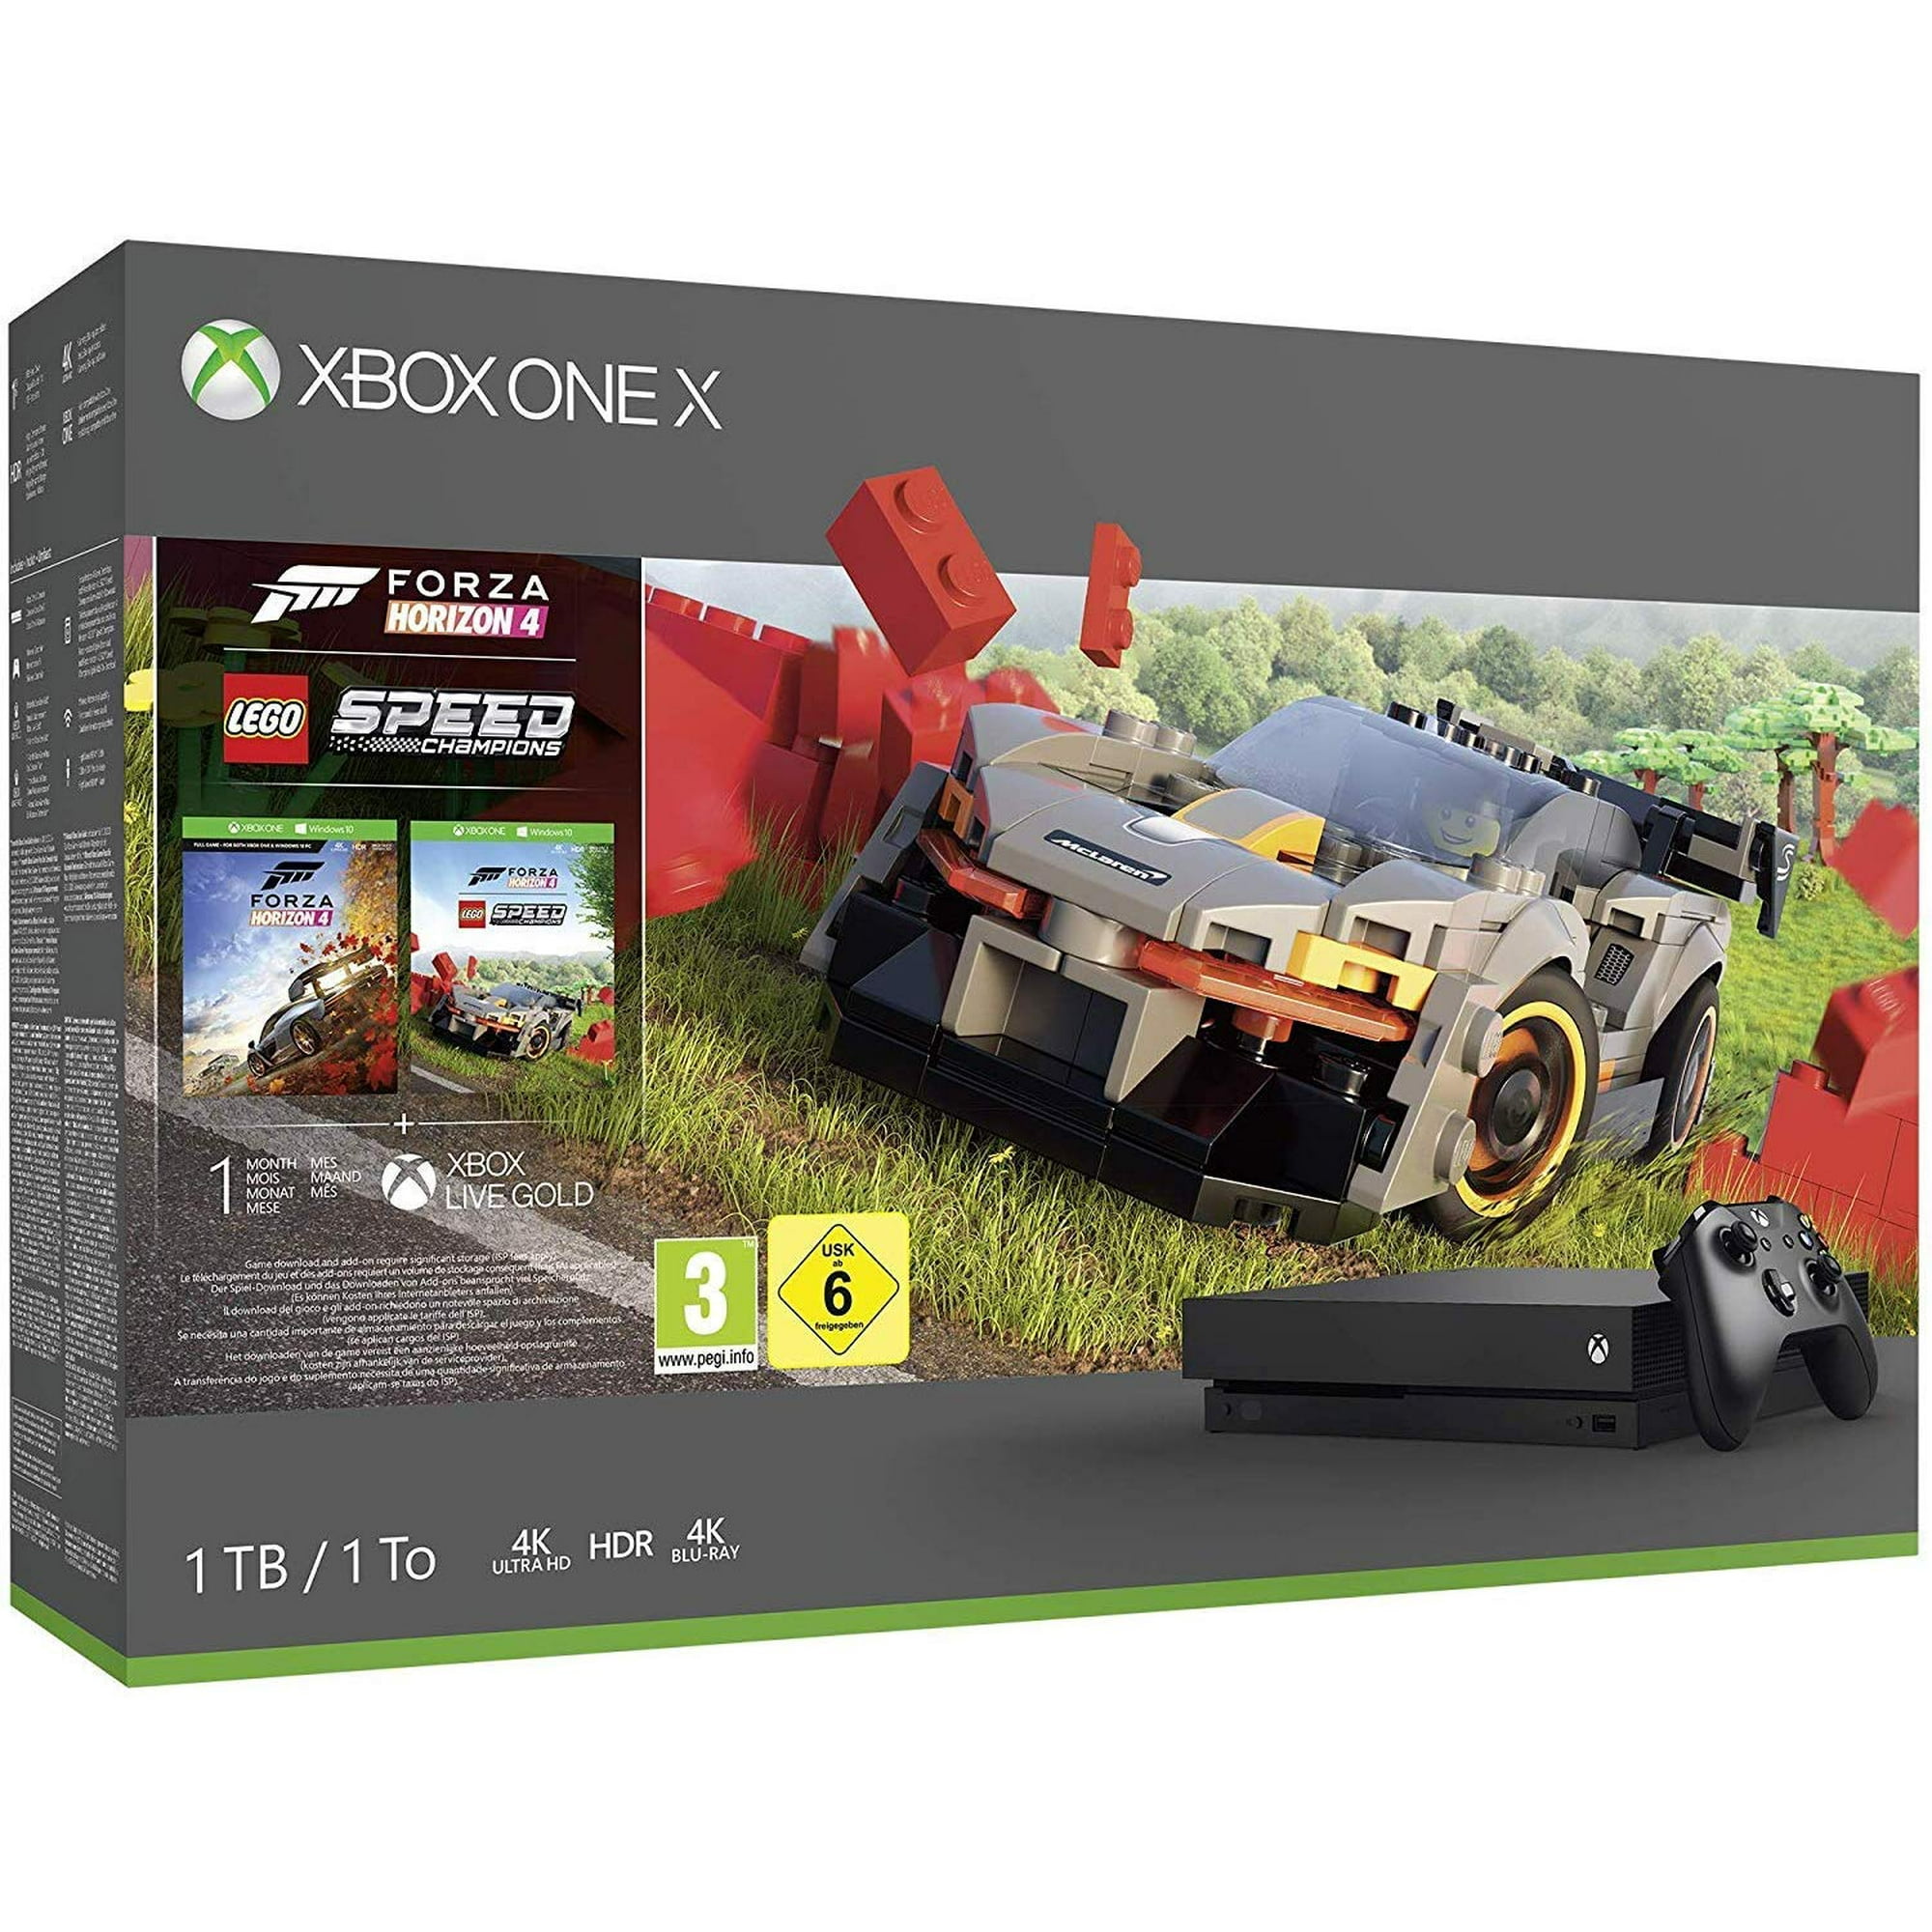 komfort fødselsdag rækkevidde Microsoft Xbox One X 1TB Forza Horizon 4 LEGO® Speed Champions Bundle, with  1 Month Xbox Live Gold and Game Pass | Walmart Canada